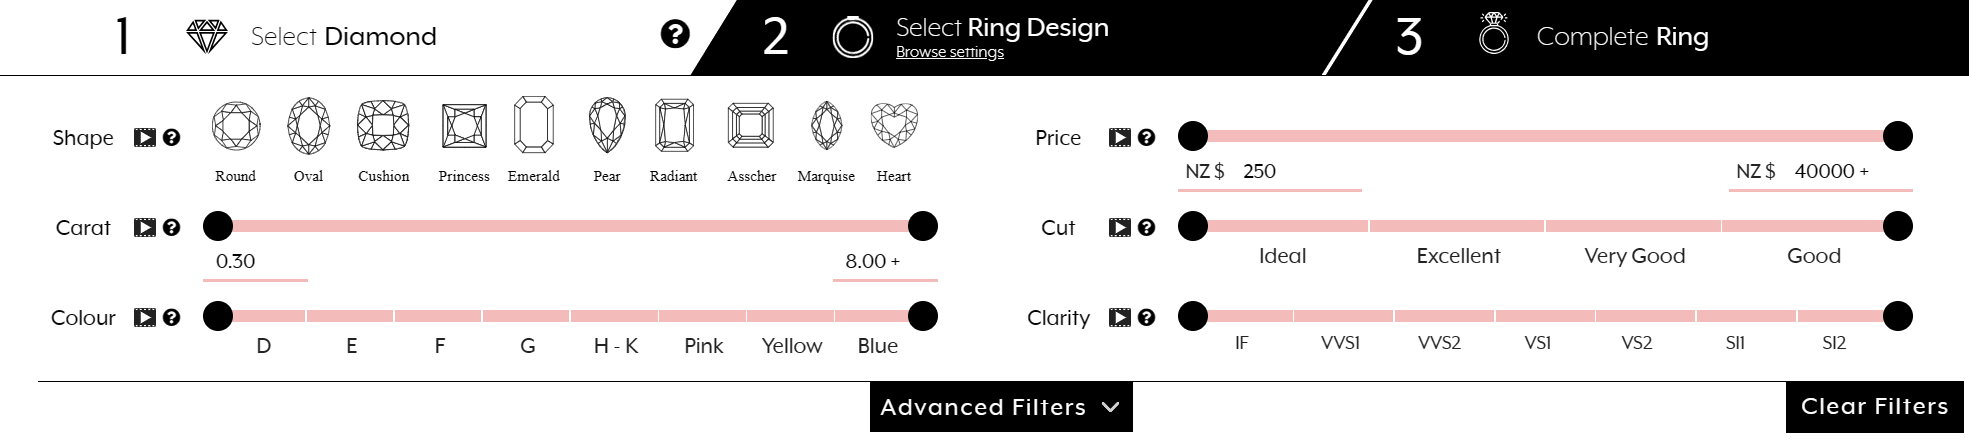 Ring builder example 1